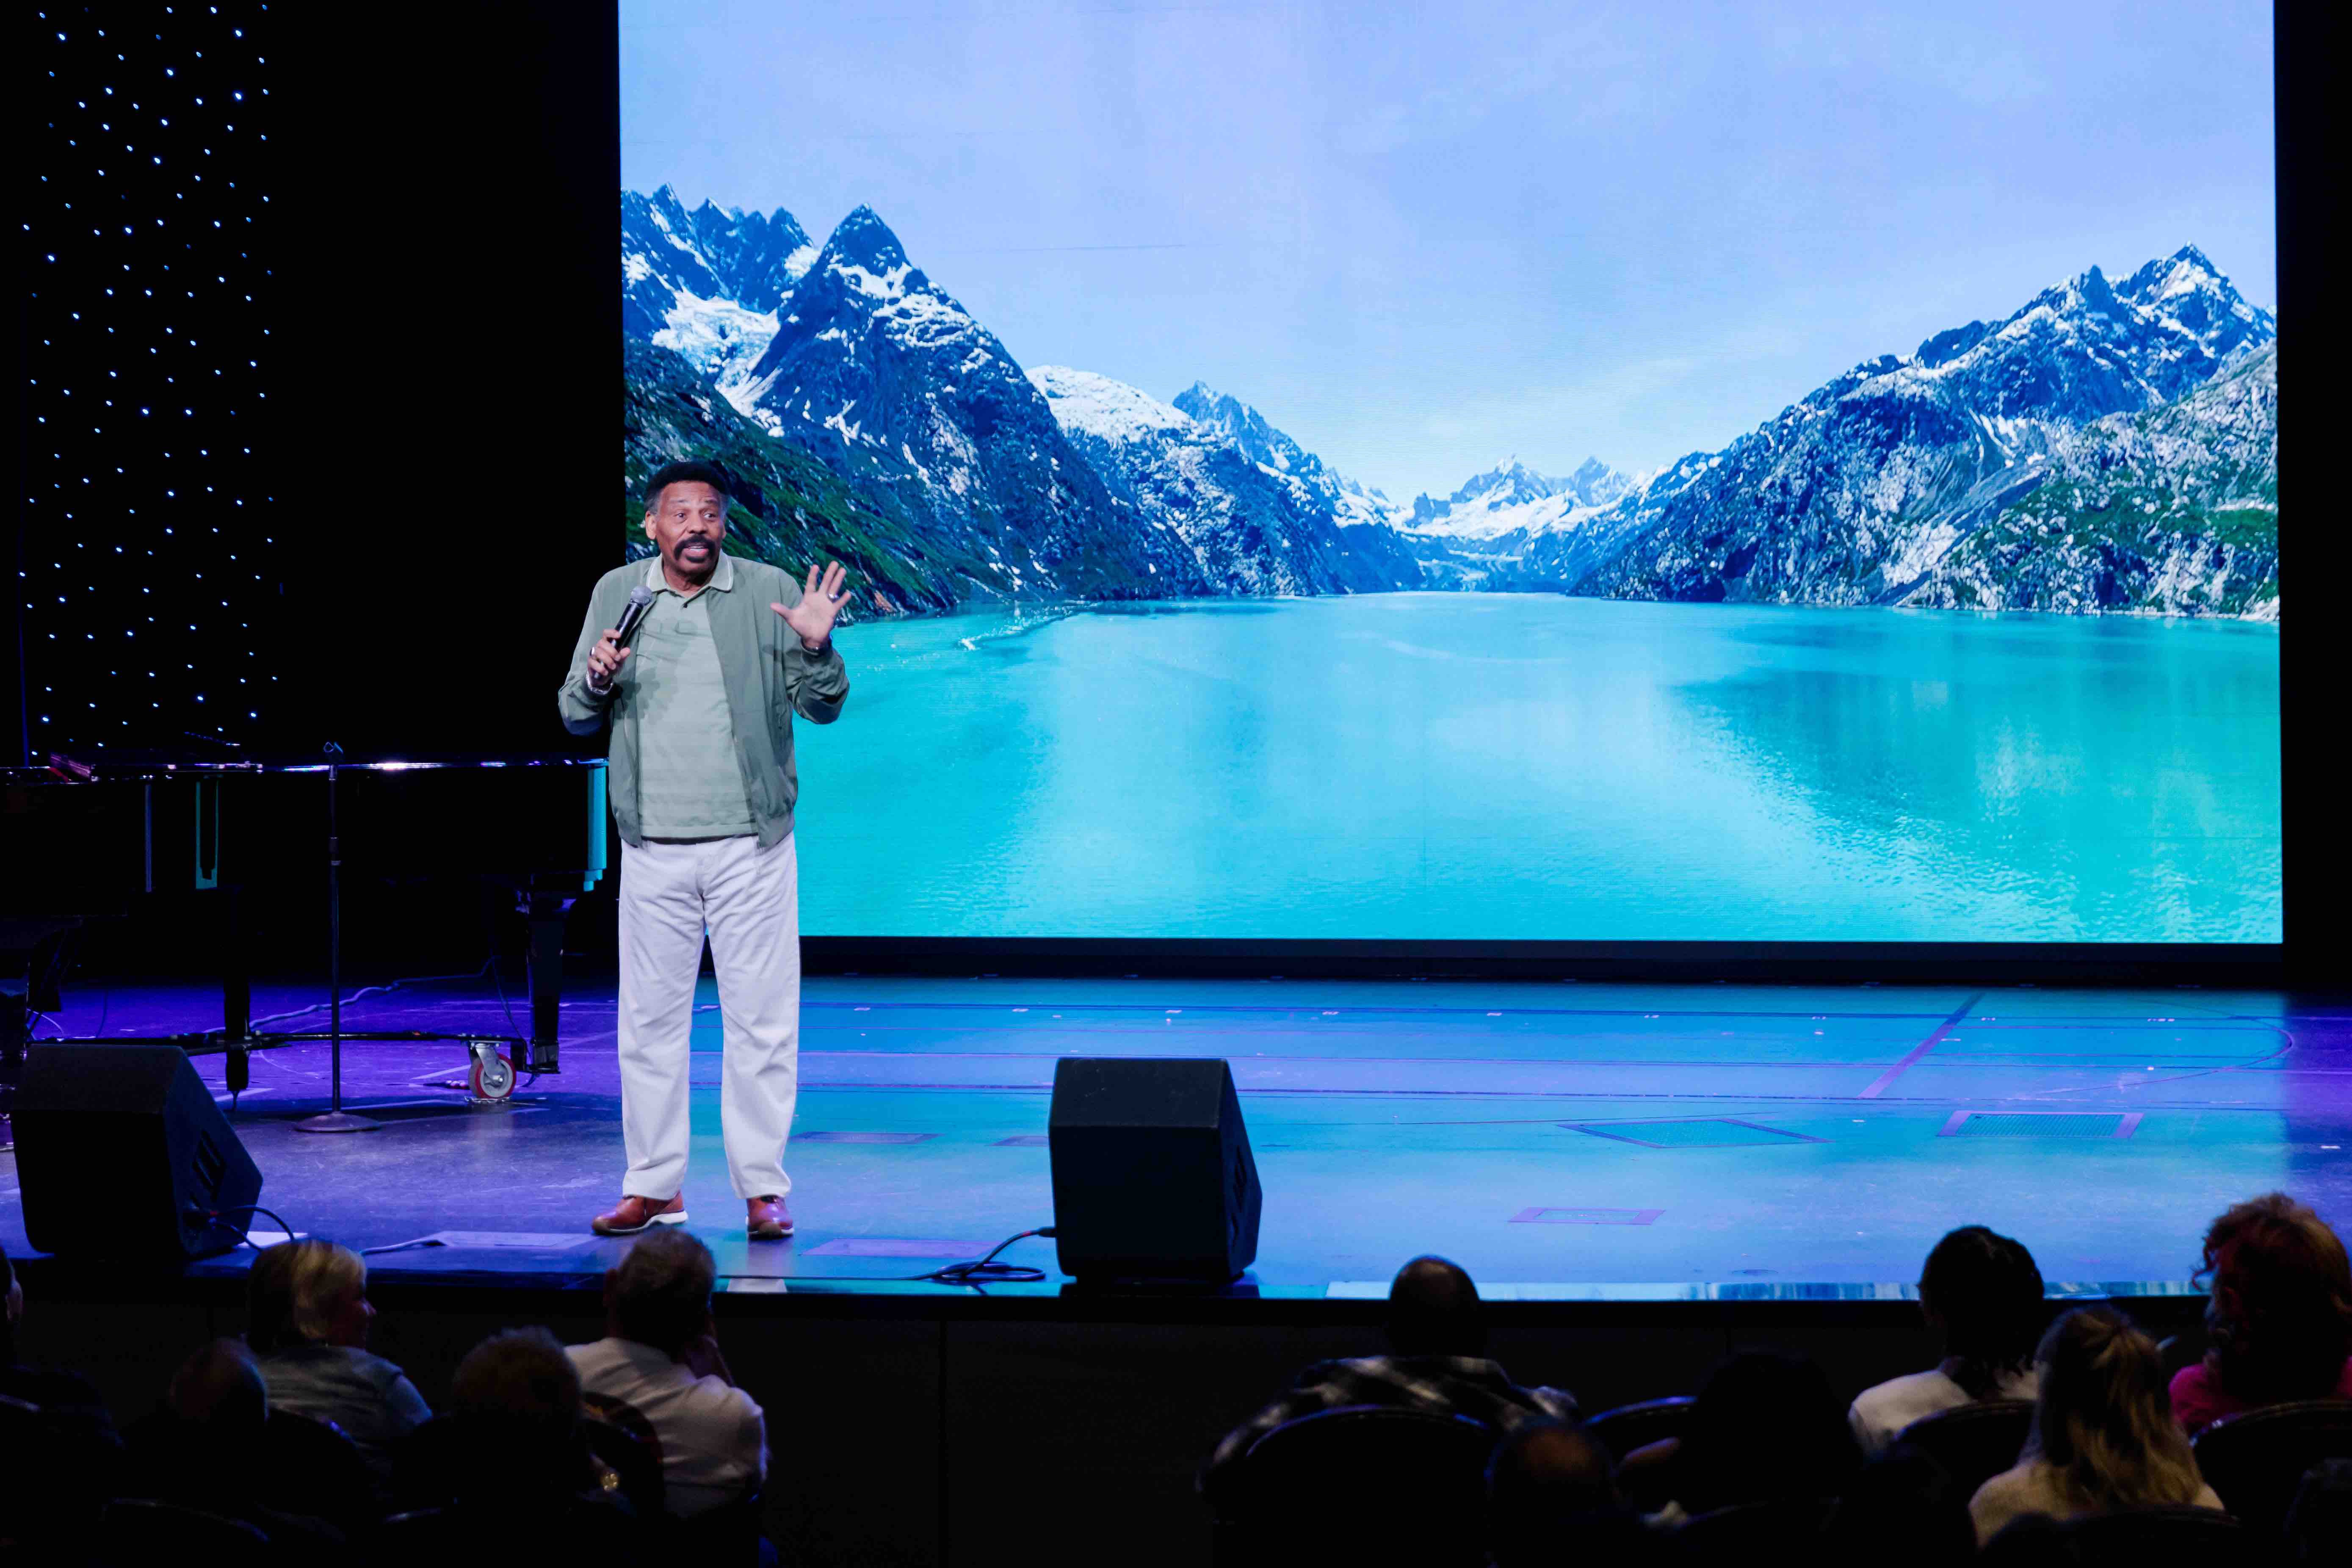 Pastor Tony Evans preaching on stage during an Alaska Cruise